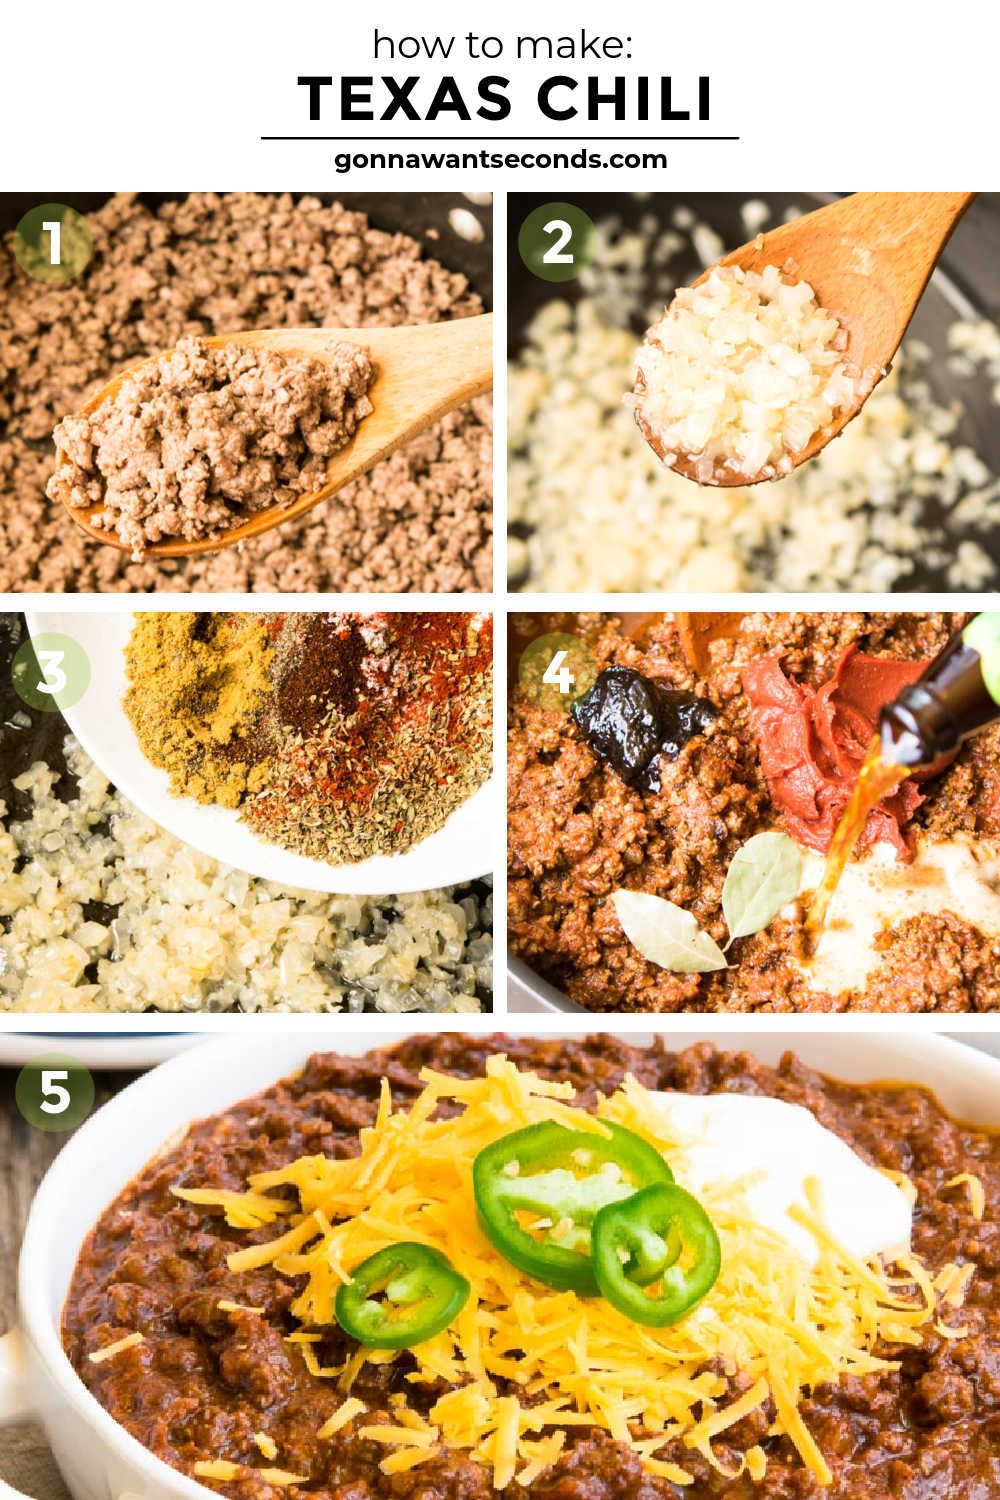 Step by step how to make texas chili